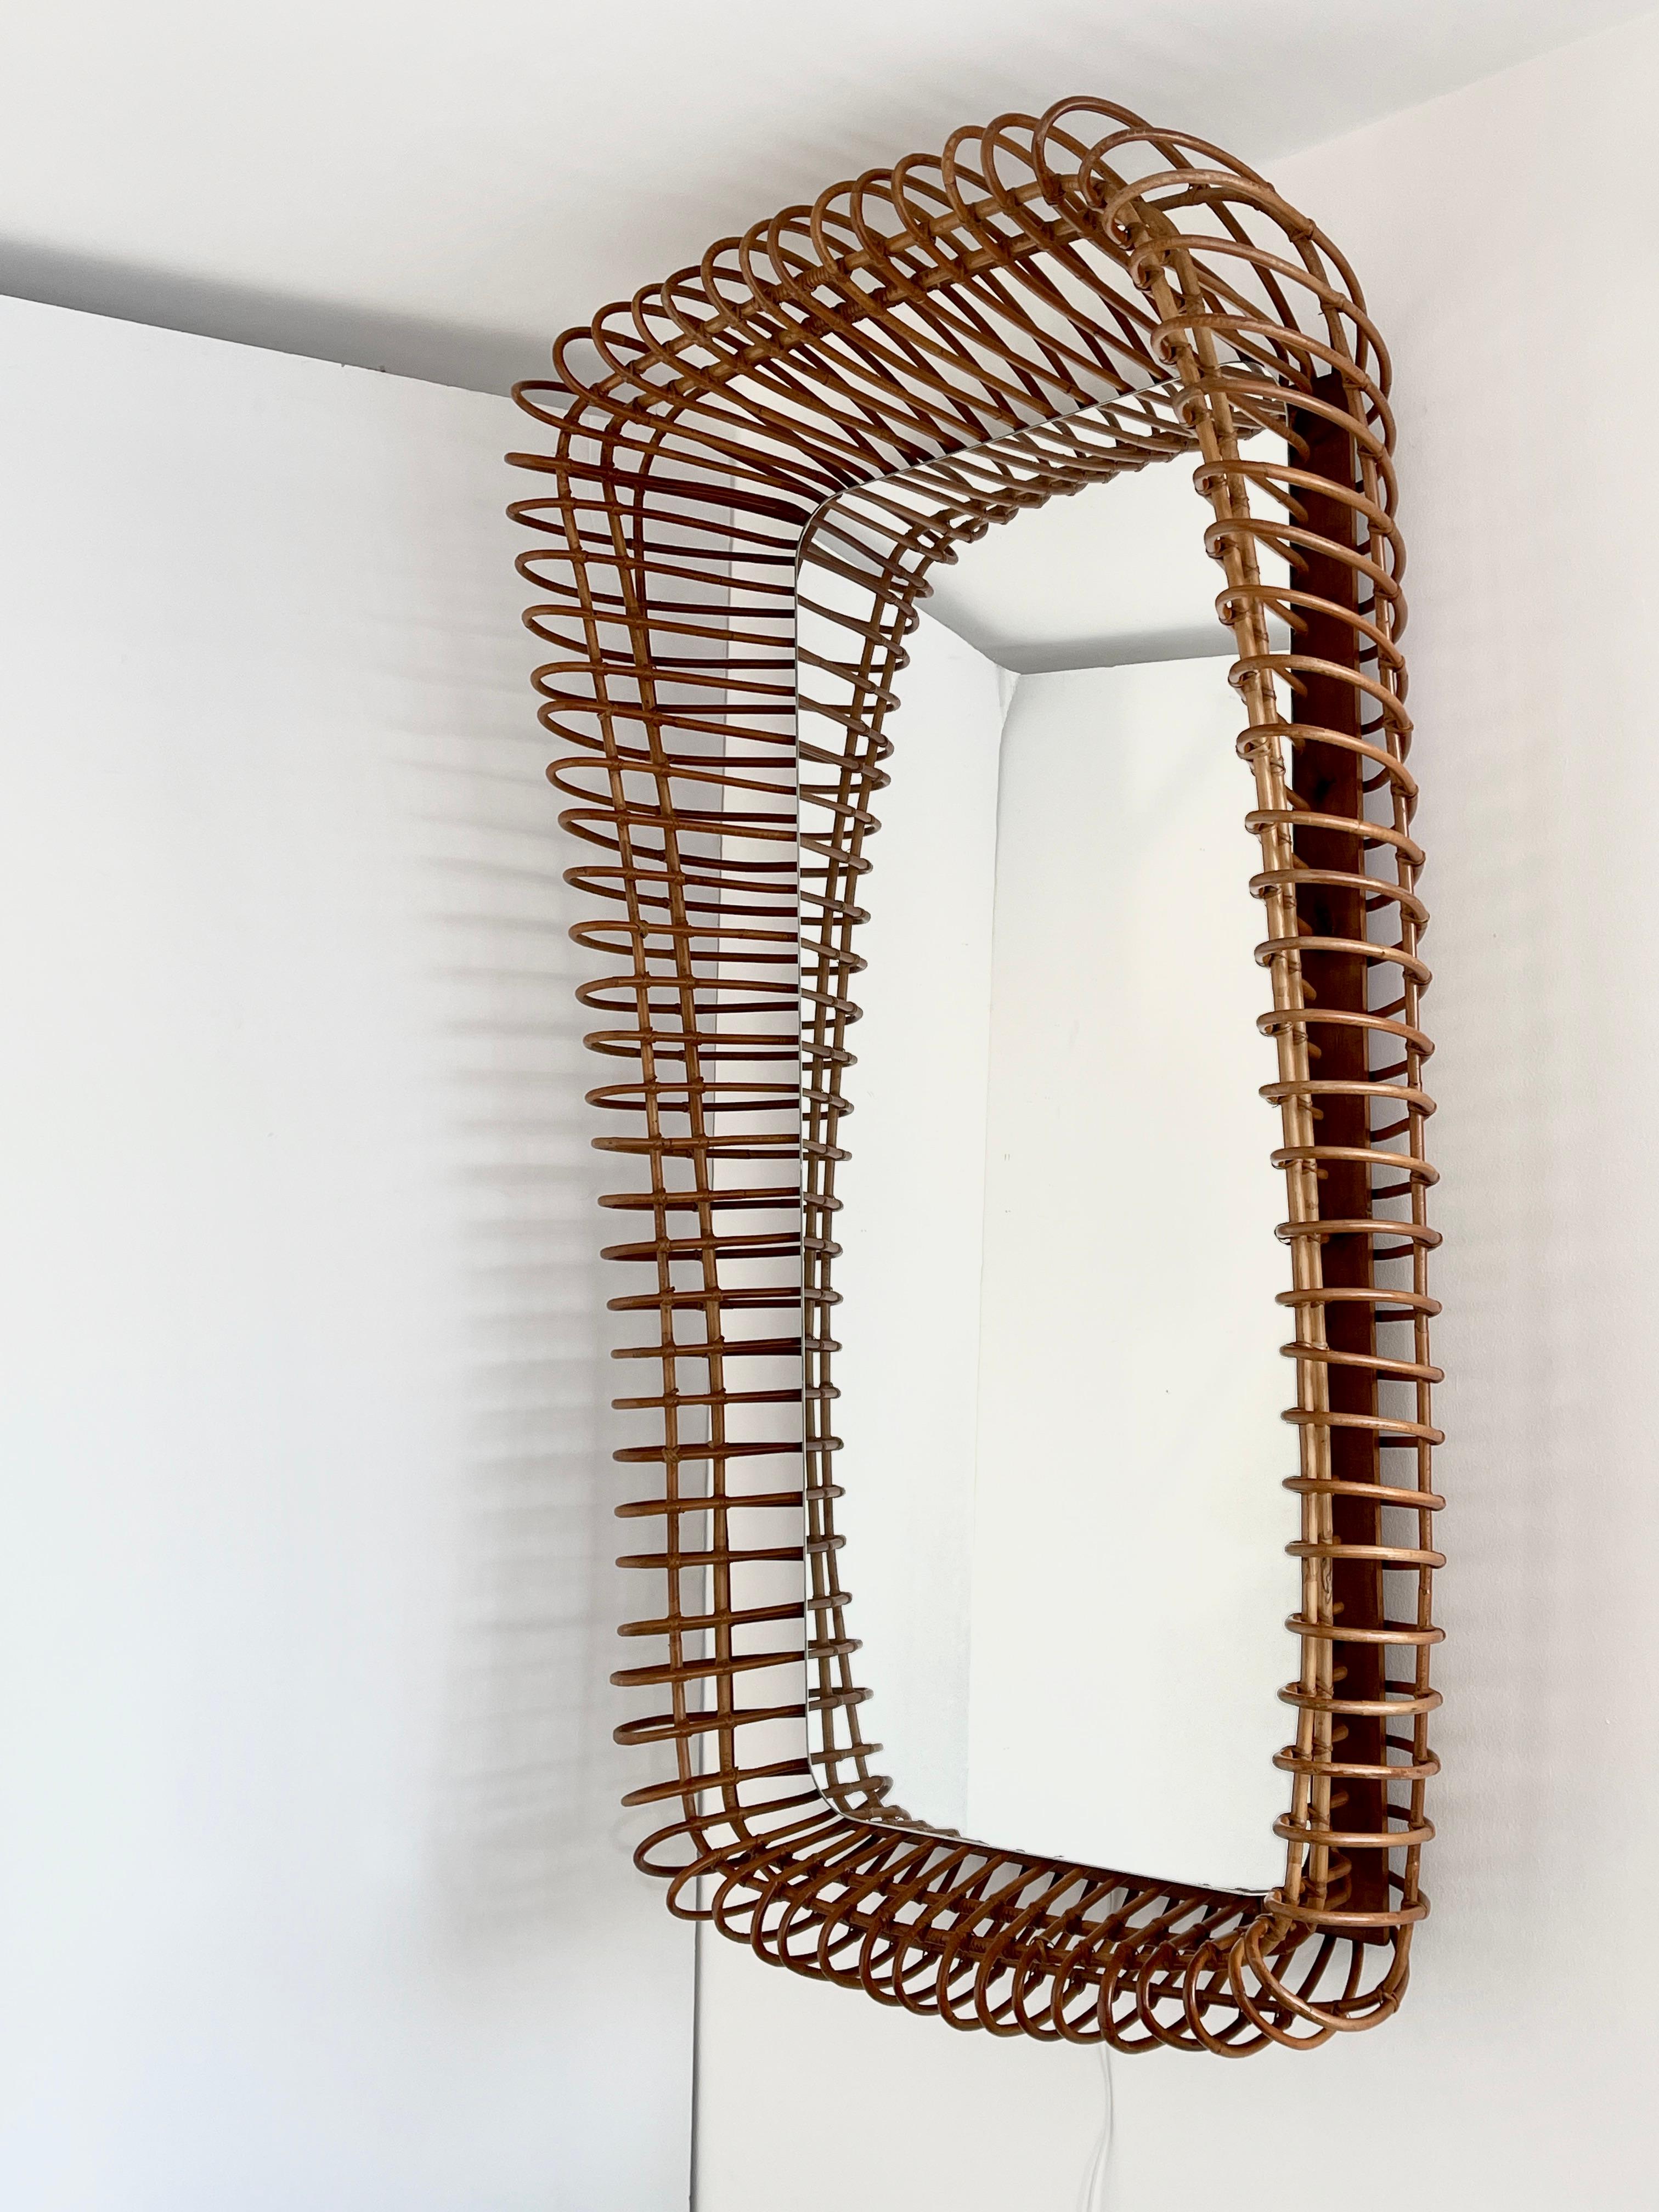 1950's French bamboo mirror - gigantic in scale - with curved edges projecting off the wall - larger at the top than the bottom. 
Newly rewired and lights from behind the mirror. 
One of a kind piece!